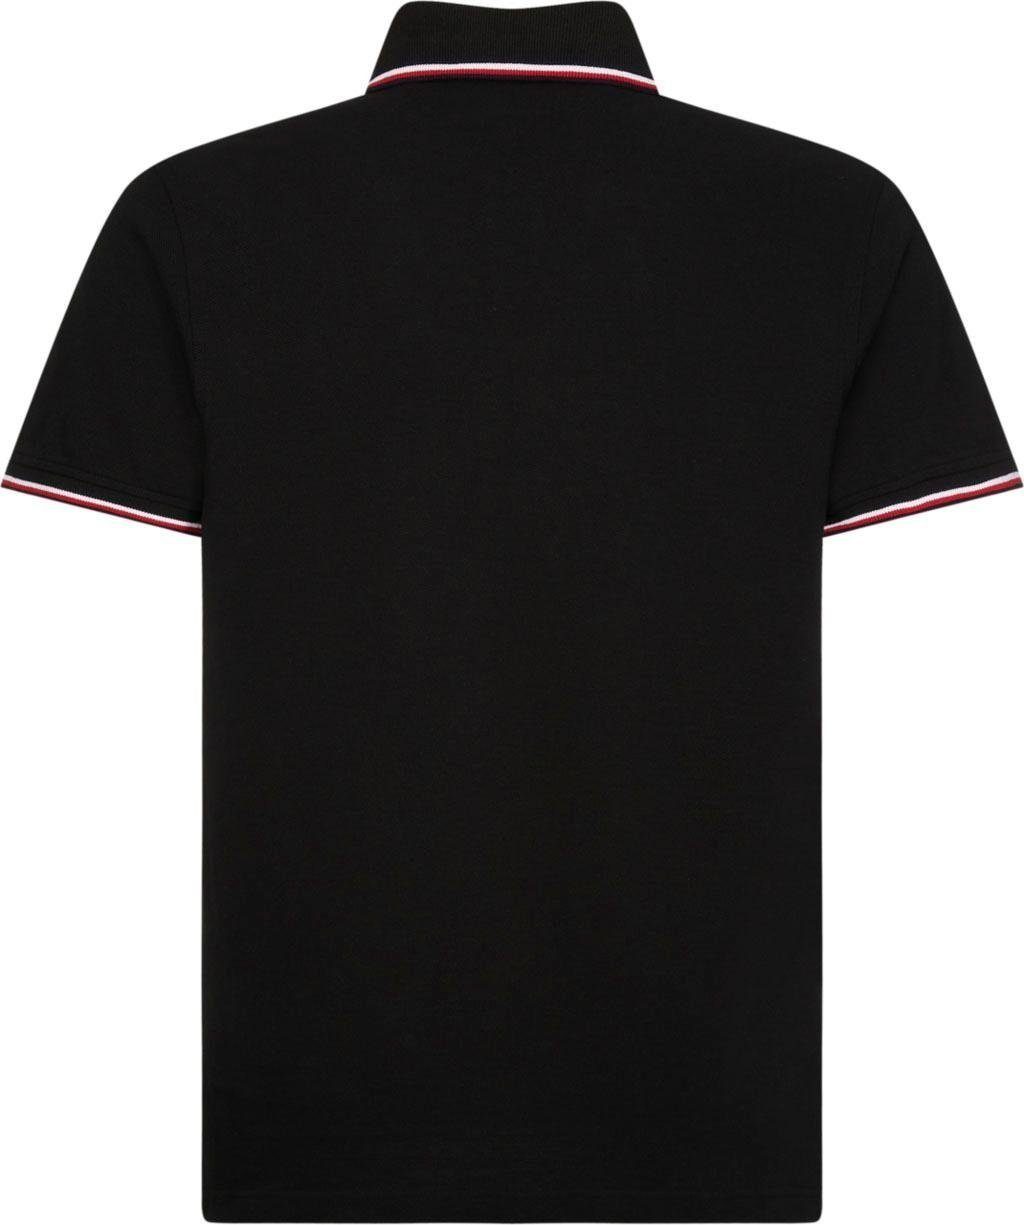 TOMMY POLO Hilfiger black TIPPED Poloshirt SLIM Tommy